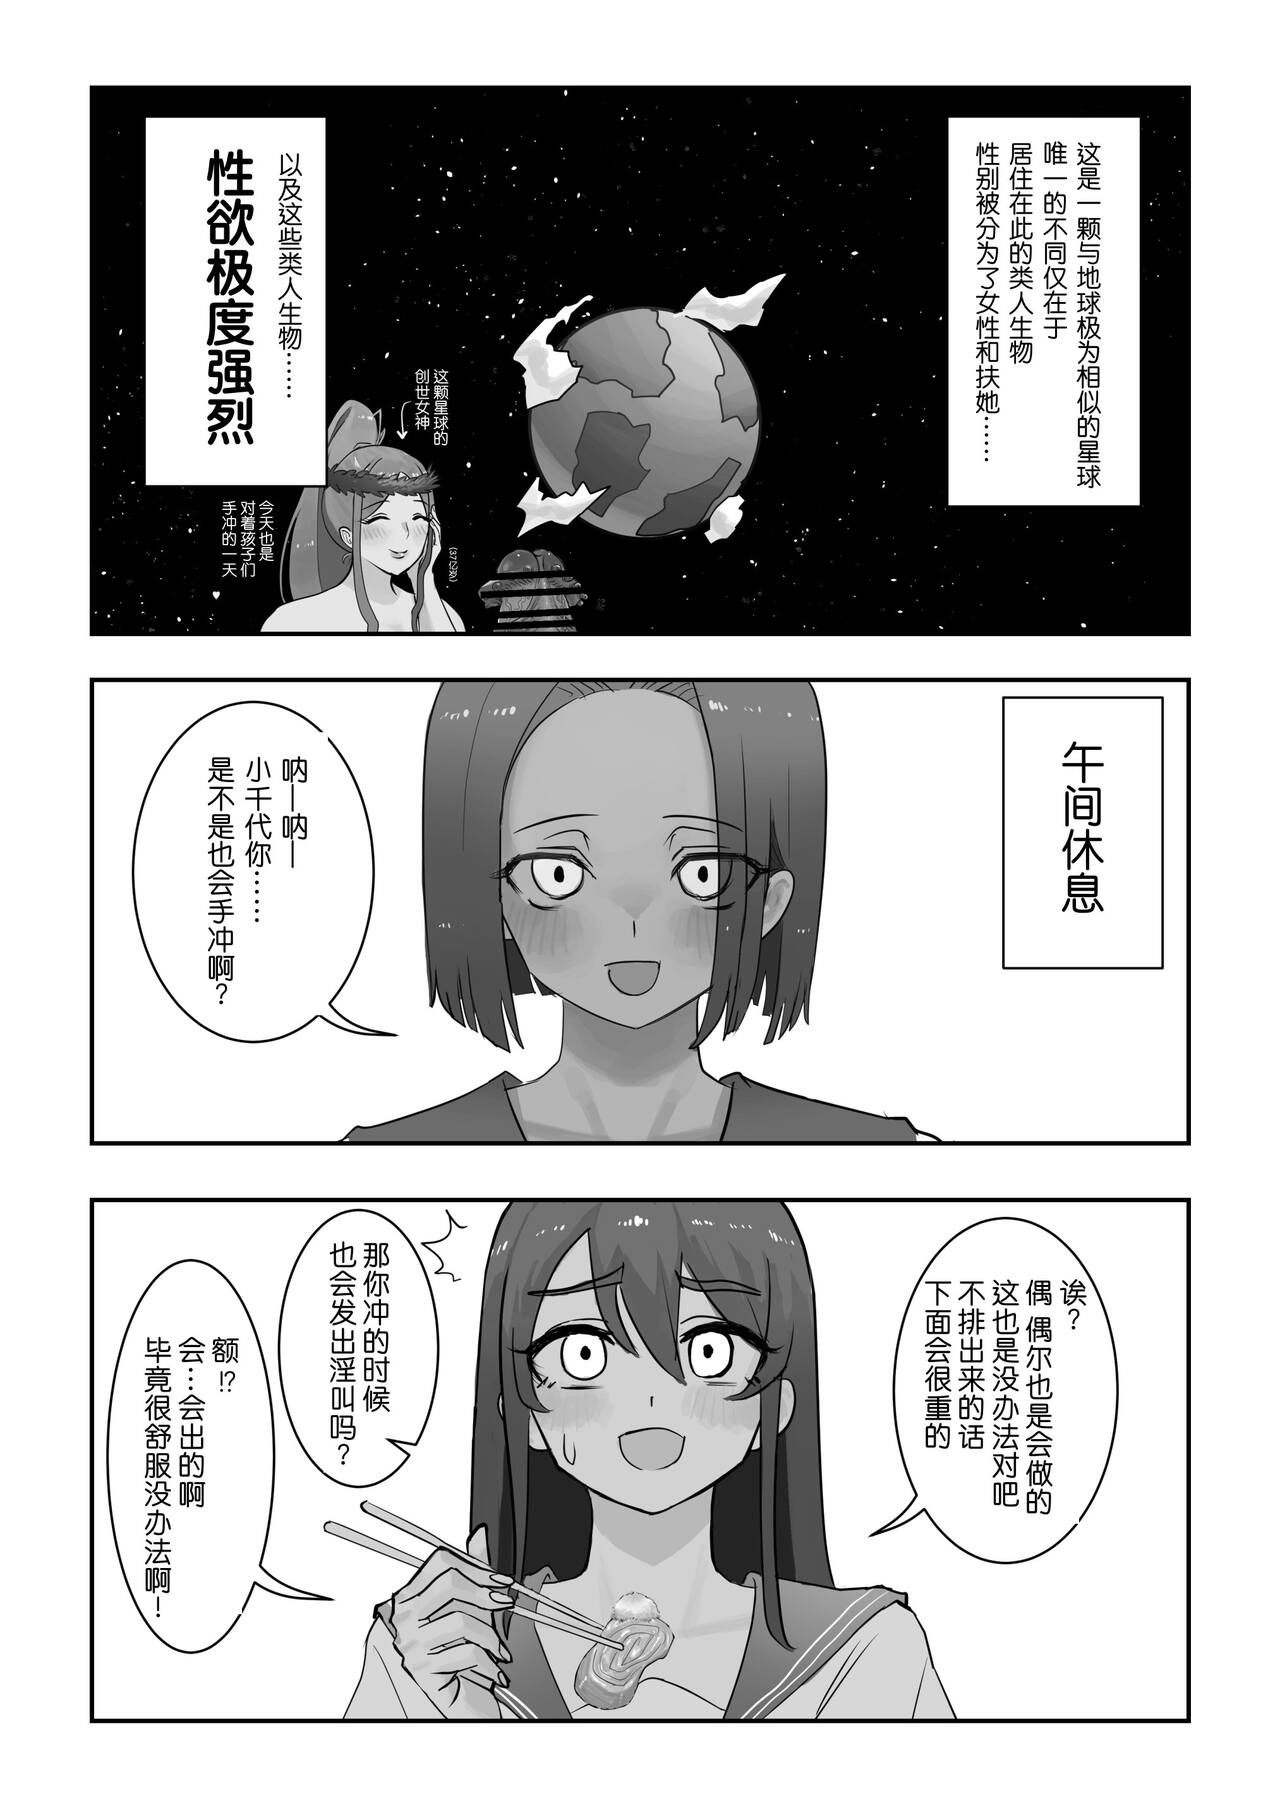 [Cave Squid] Onahole After School [Chinese] [洞窟イカ] 放課後ニセおマンコ [中国翻訳]